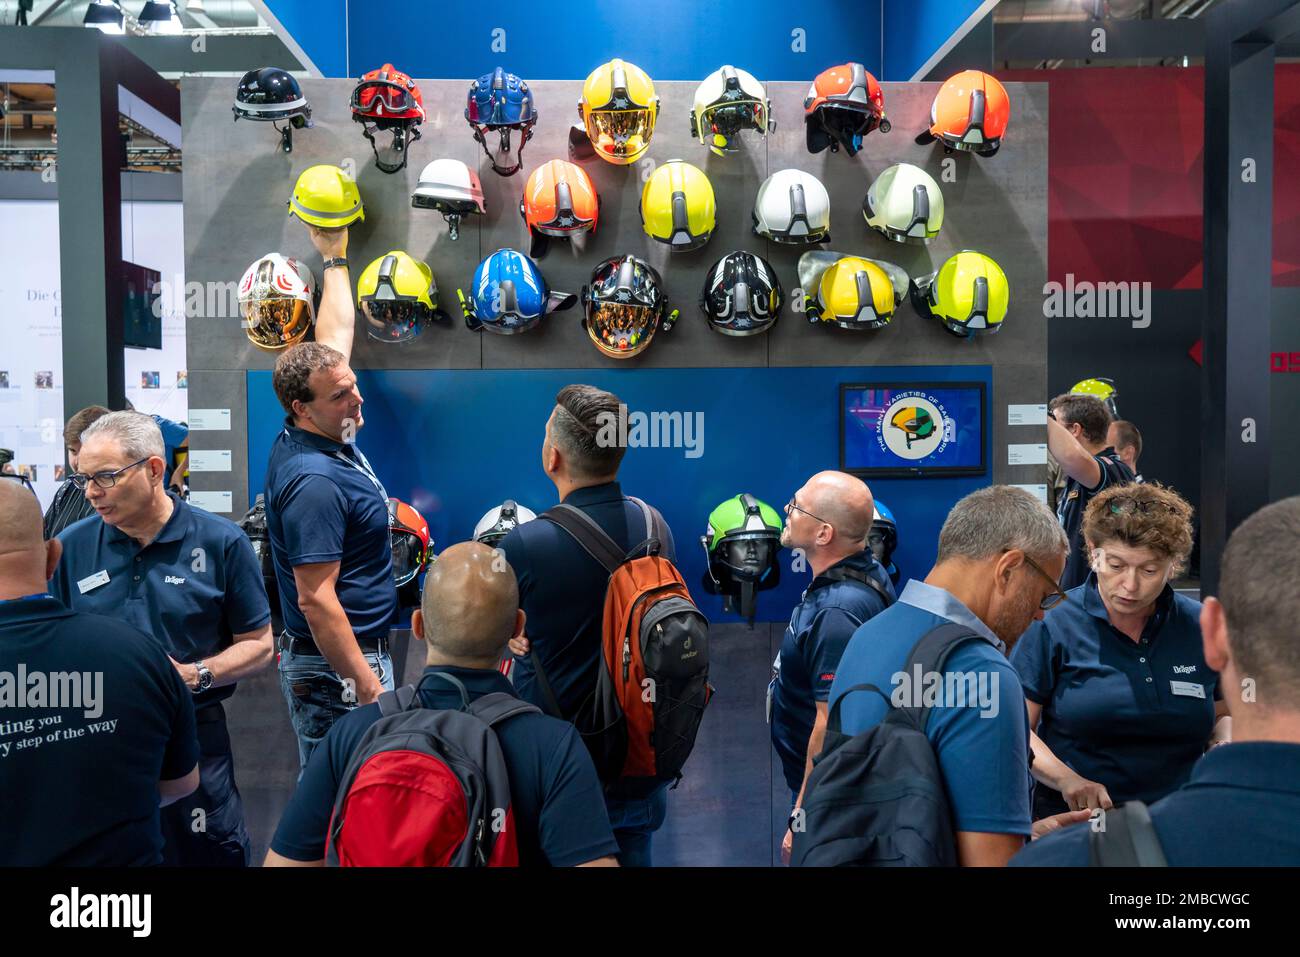 Personal protective equipment, clothing for firefighters, Interschutz 2022 trade fair in Hanover, the world's largest trade fair for firefighting, res Stock Photo